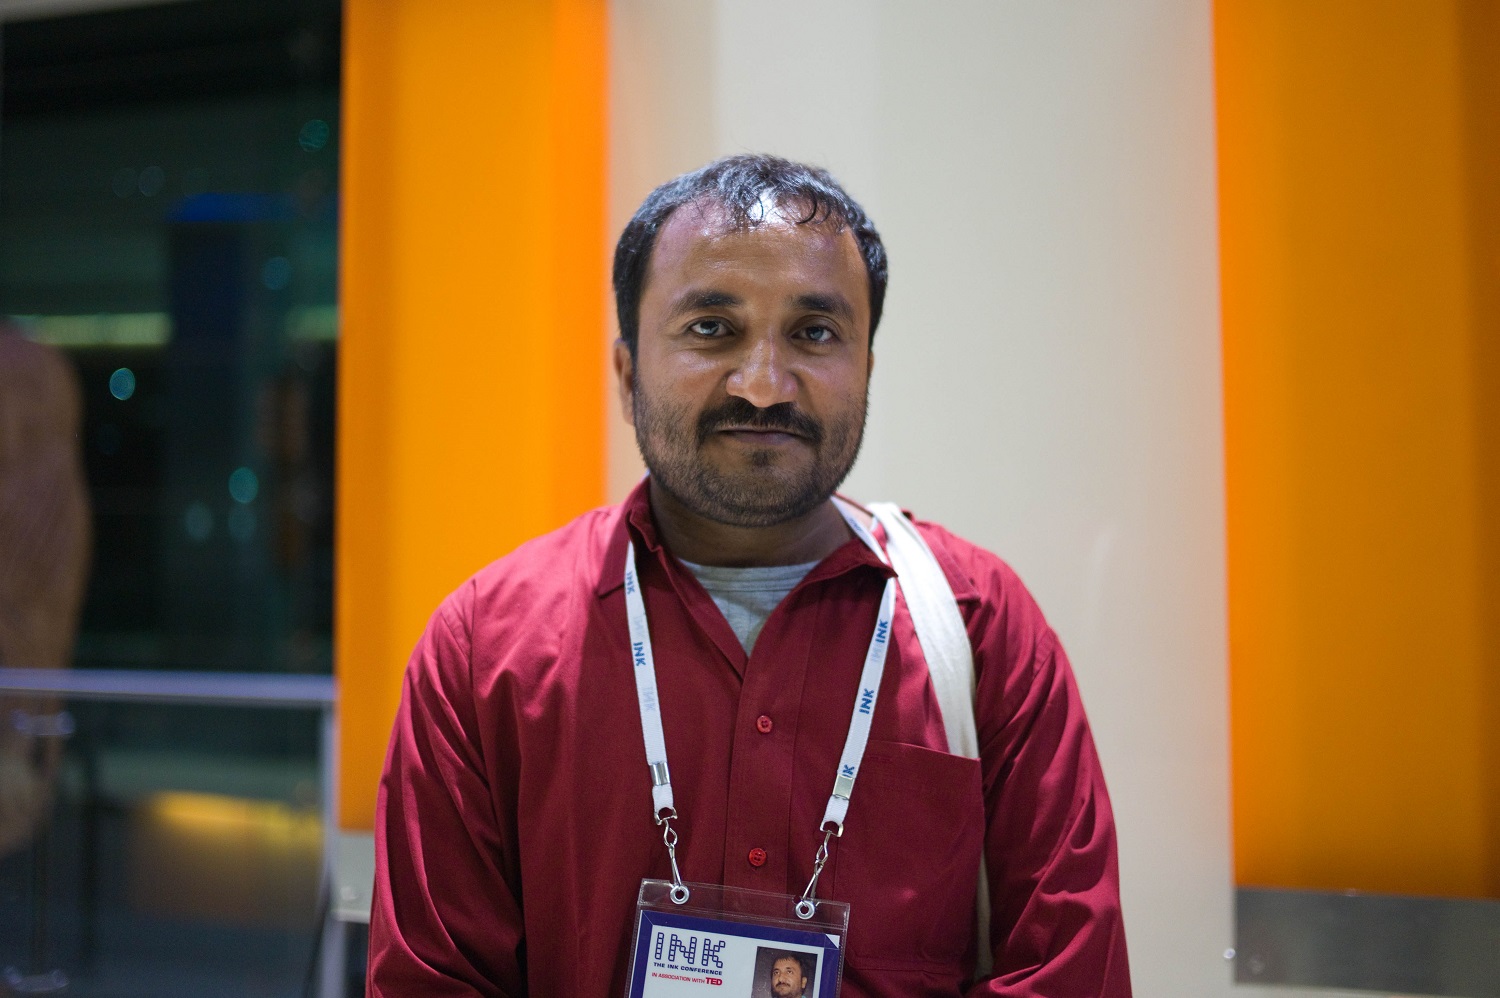 Super 30 founder Anand Kumar felicitated in US